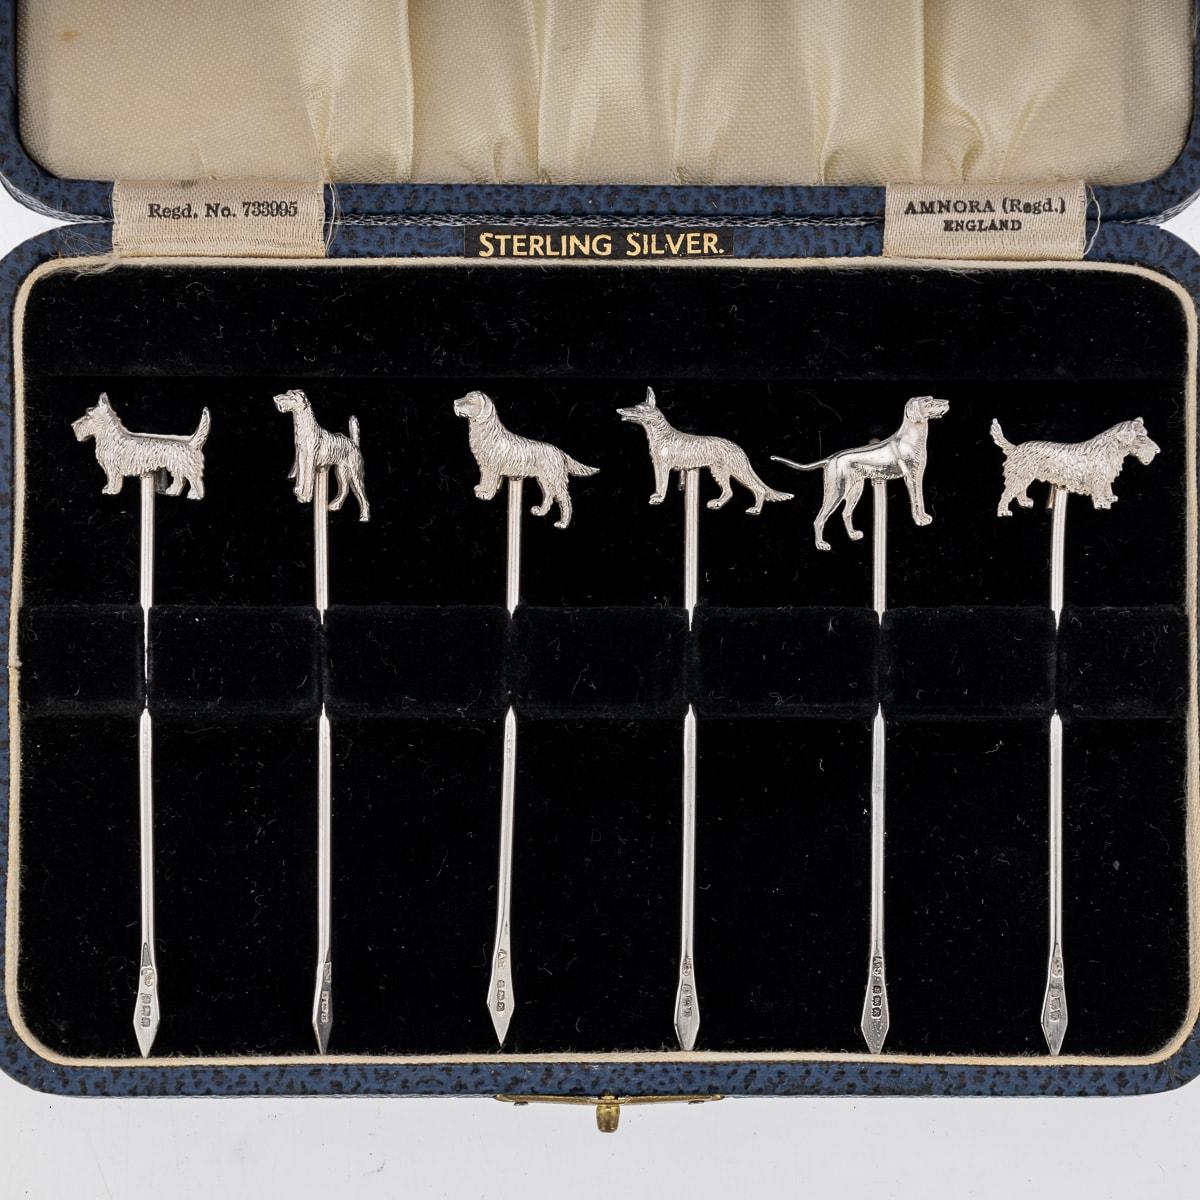 Antique 20th Century George V solid silver set of six cocktail picks, mounted with cast models of various dog breeds. The set comes in its original leatherette and velvet lined box. Each piece is Hallmarked English silver (925 Standard), Birmingham,